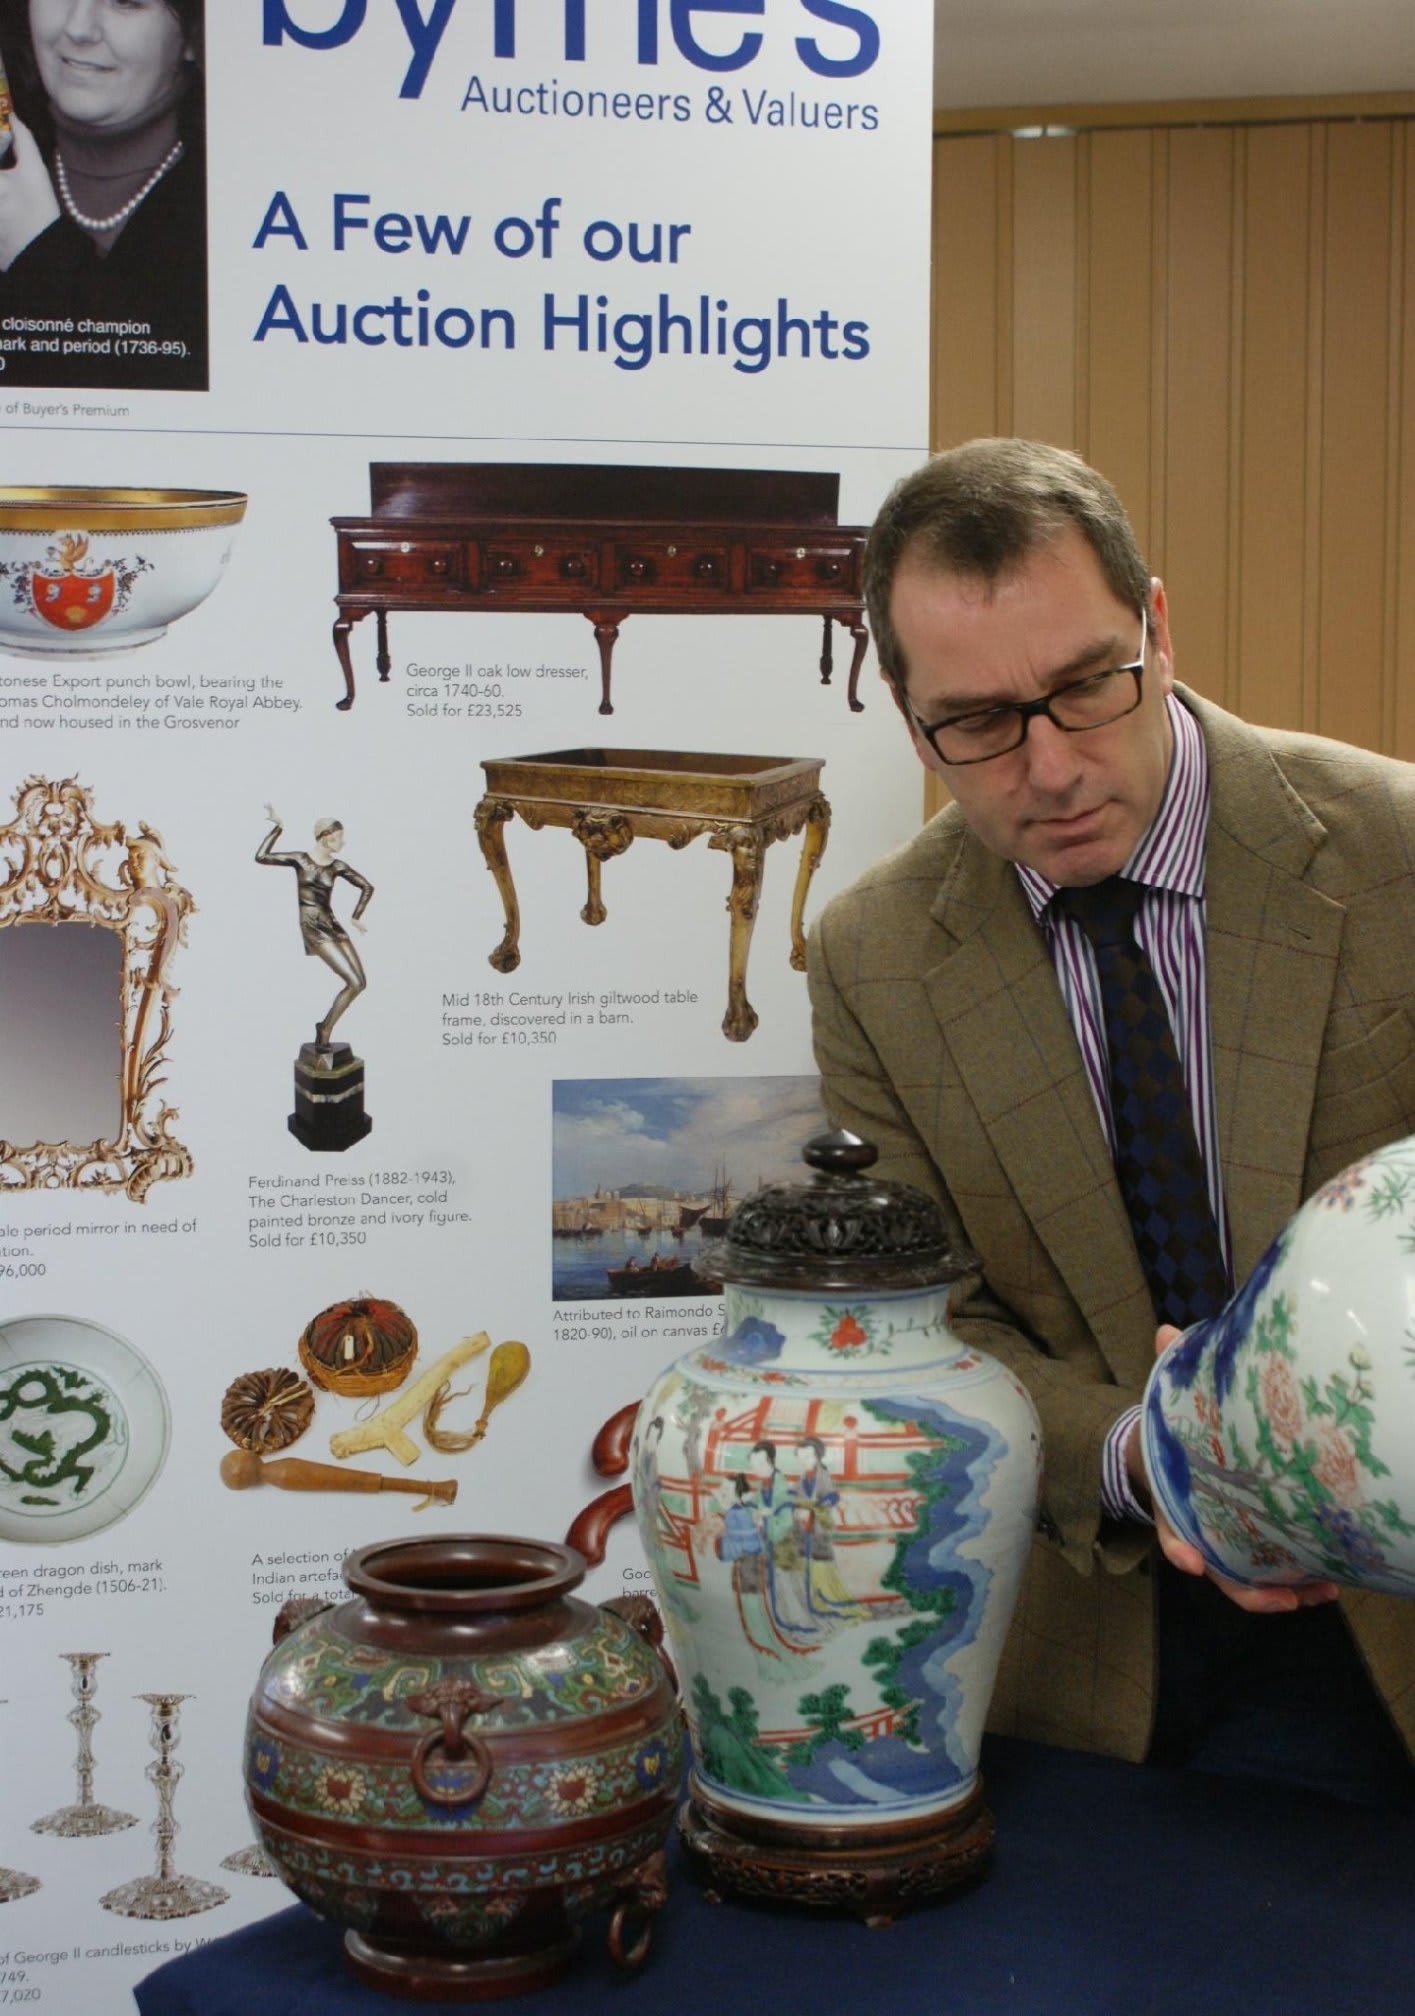 Images Byrne's Auctioneers & Valuers